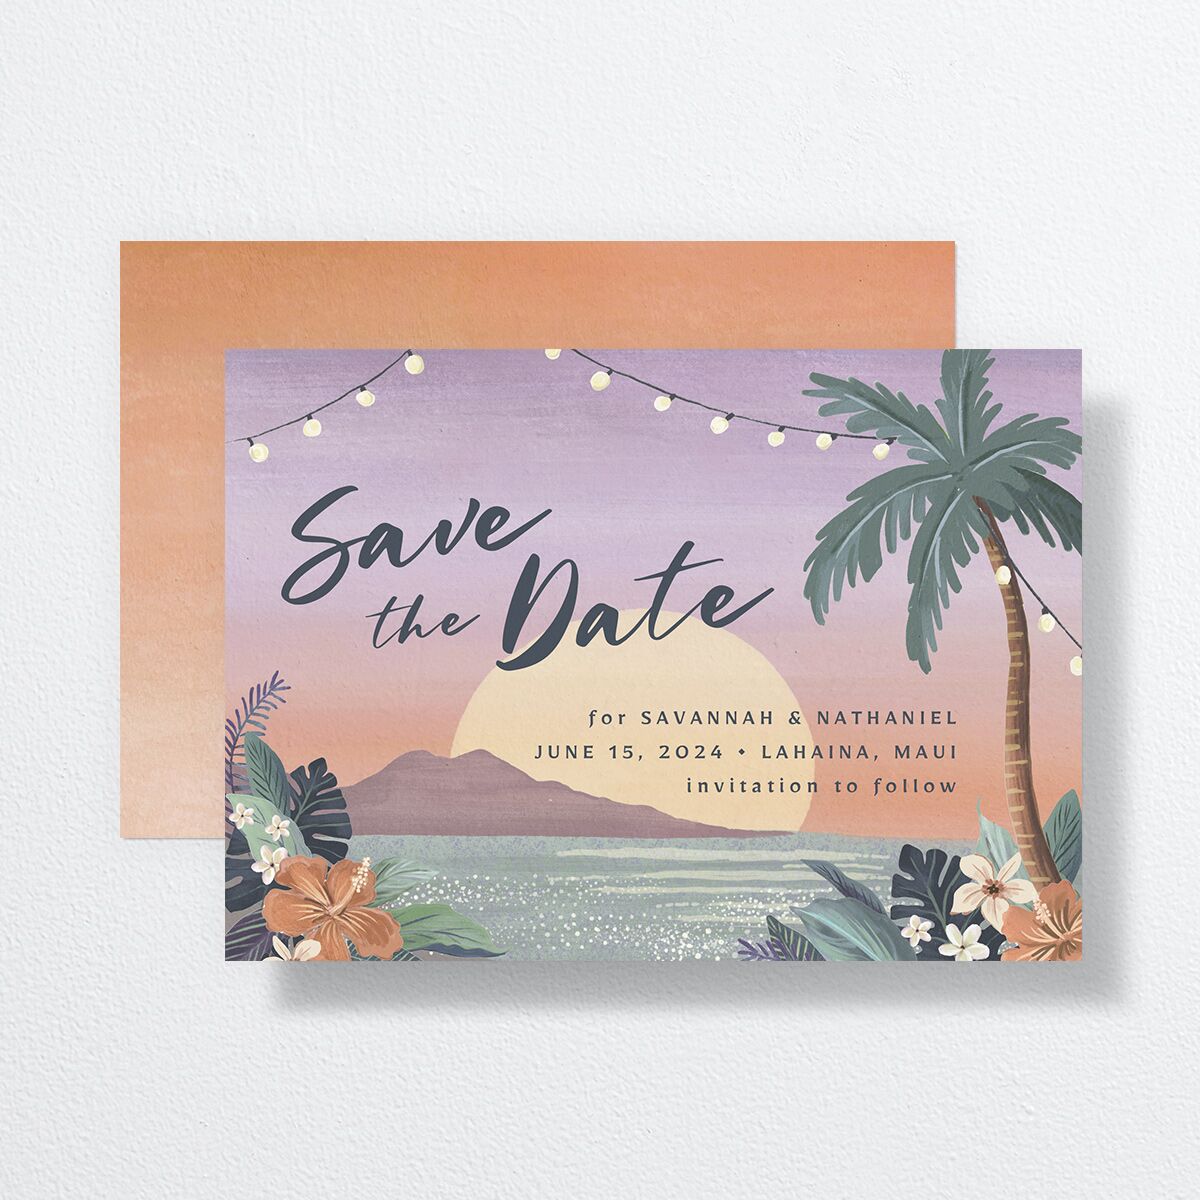 Vintage Island Save The Date Cards front-and-back in Purple